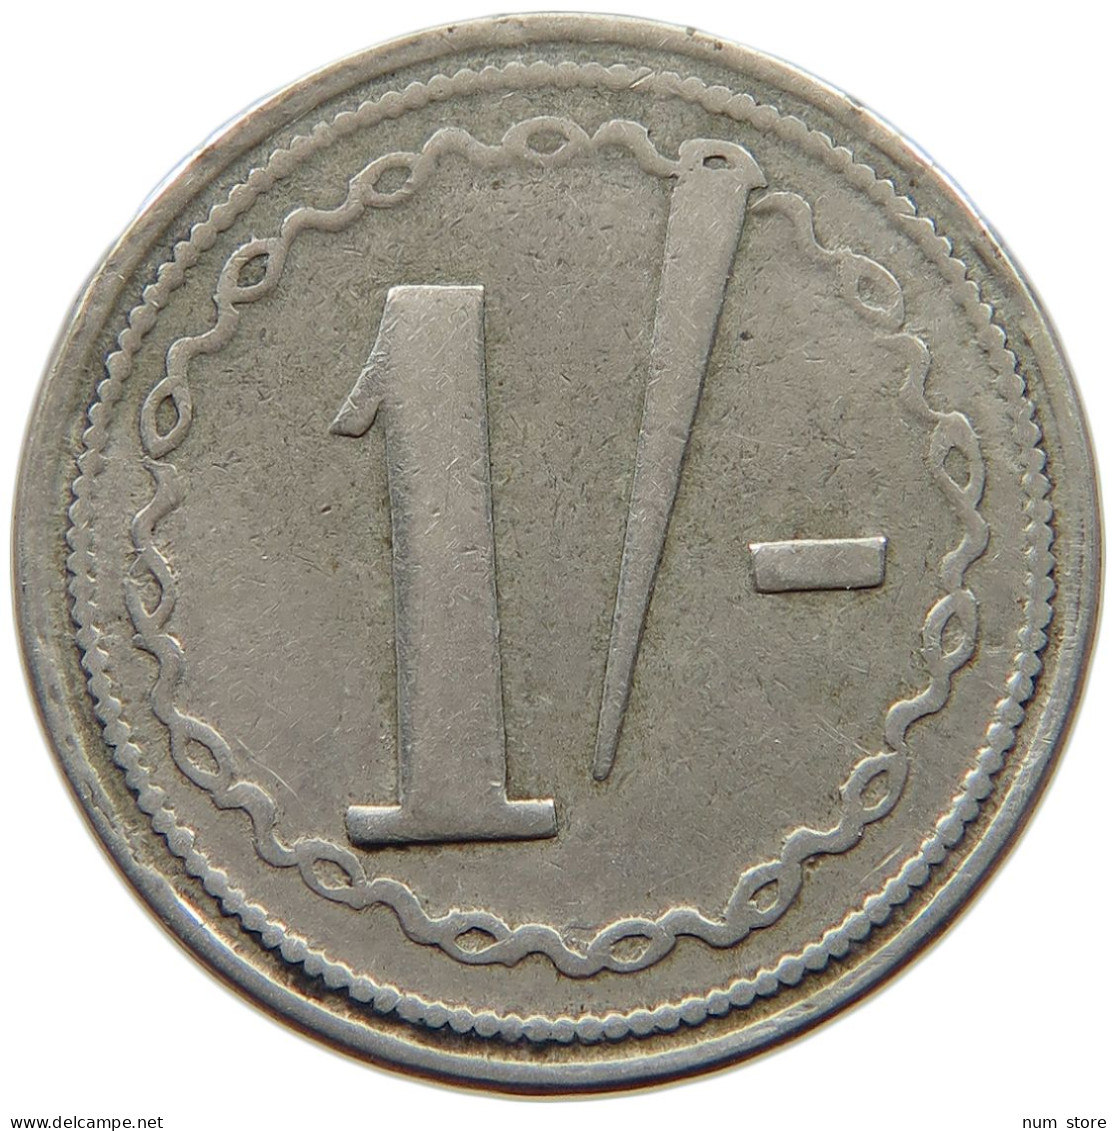 GREAT BRITAIN 1 1/2 PENNY TOKEN   #c055 0085 - E. 1 1/2 - 2 Pence